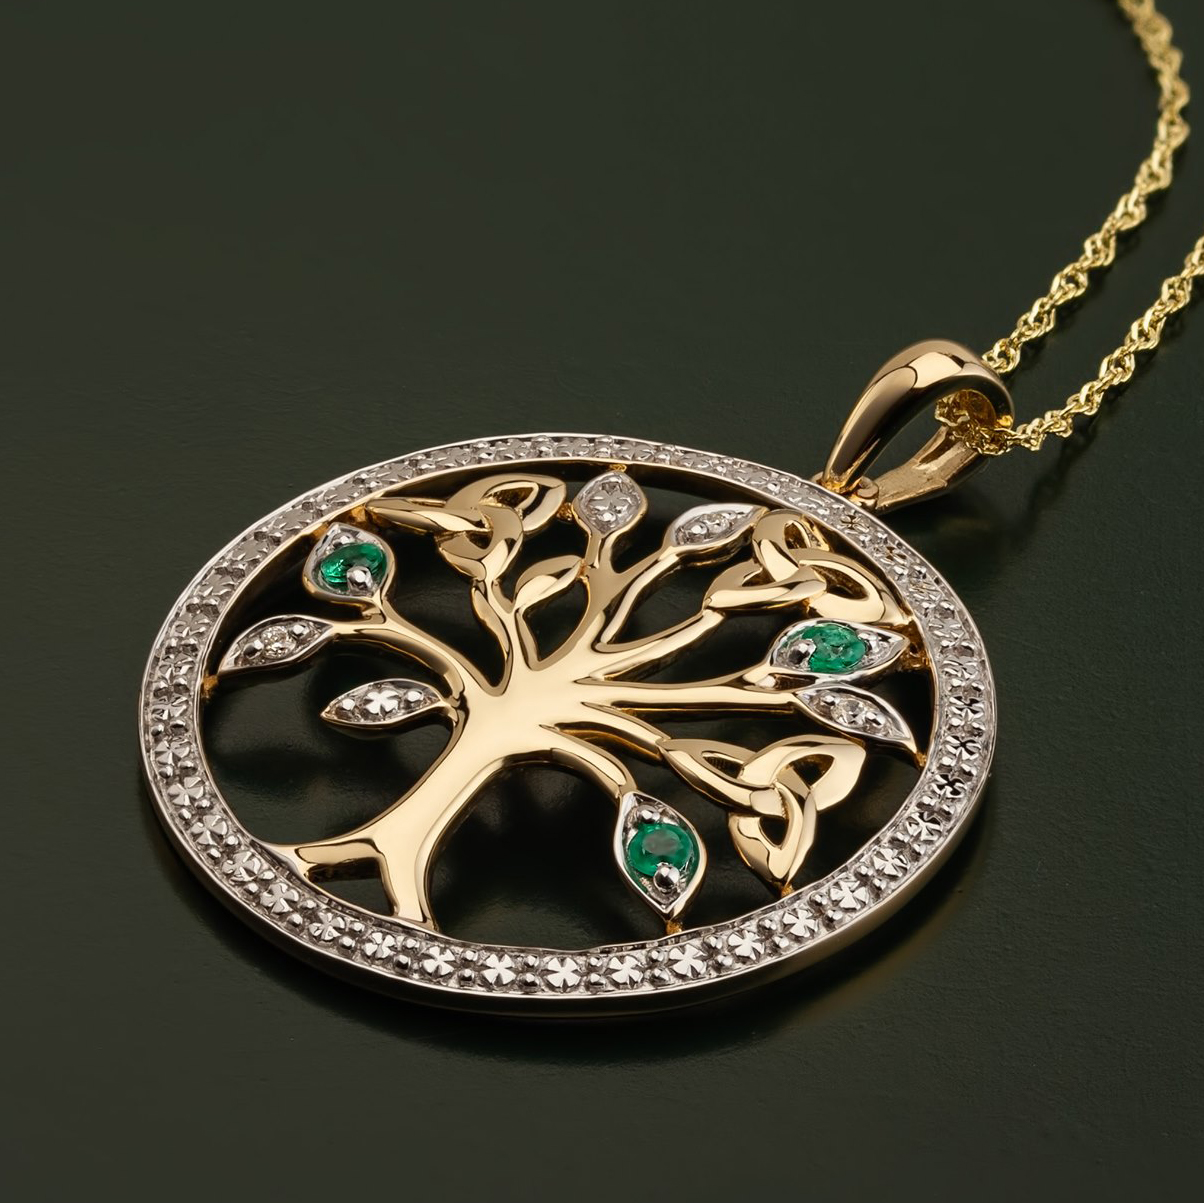 Product image for Irish Necklace - 14k Gold with Diamonds and Emeralds Tree of Life Pendant